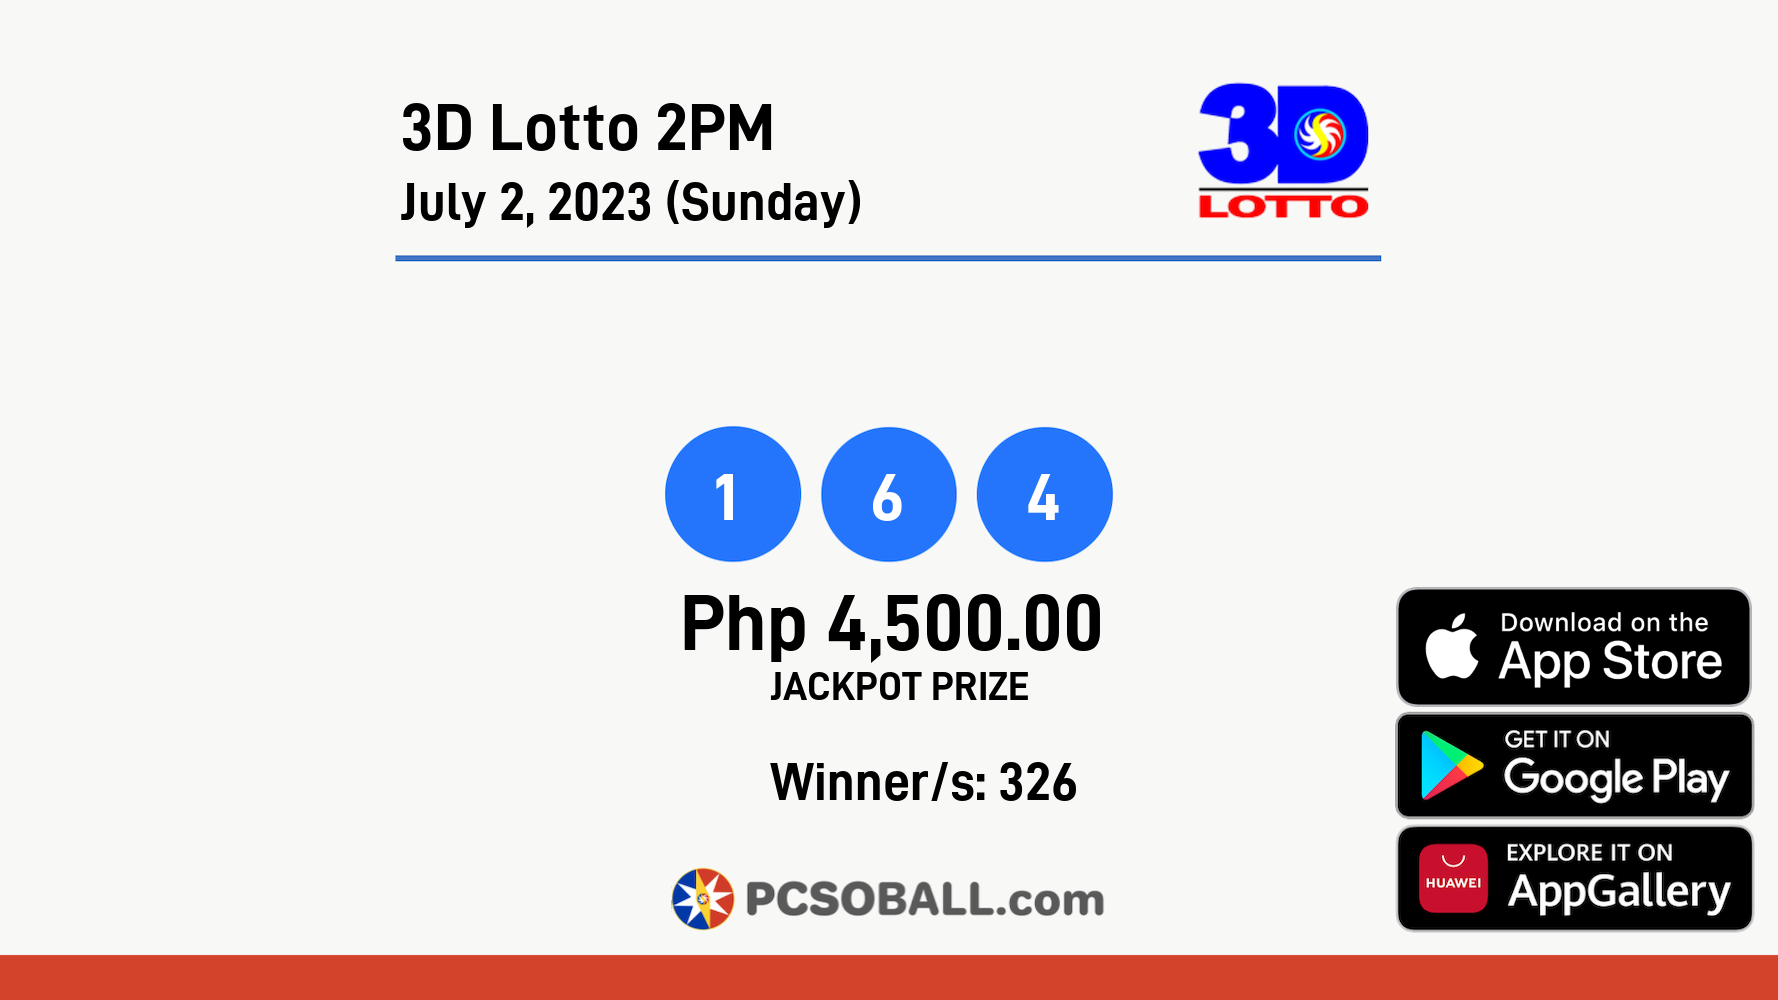 3D Lotto 2PM July 2, 2023 (Sunday) Result